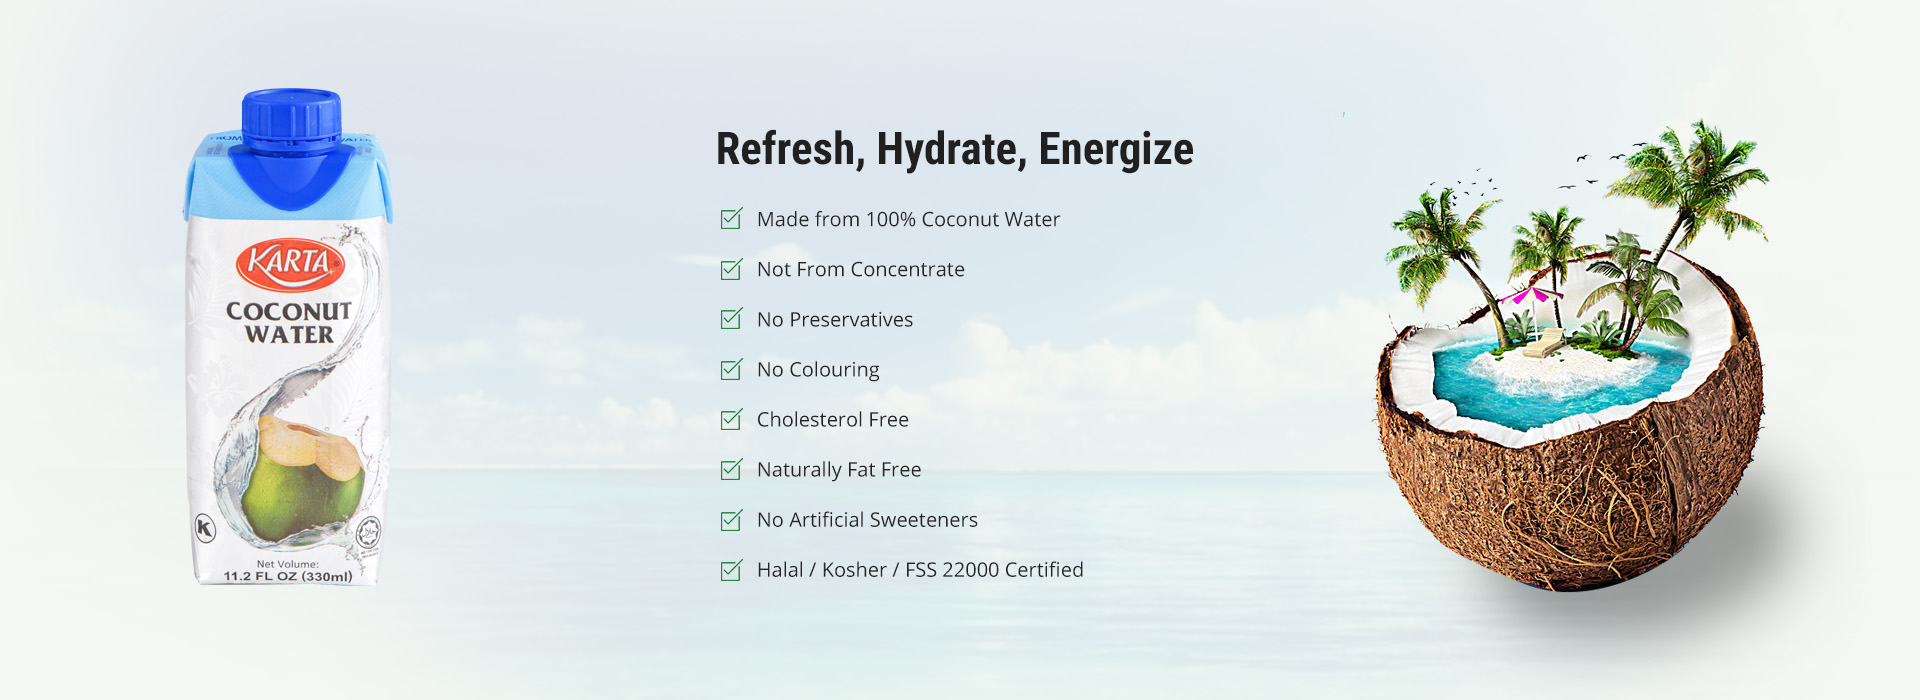 Refresh, Hydrate, Energize